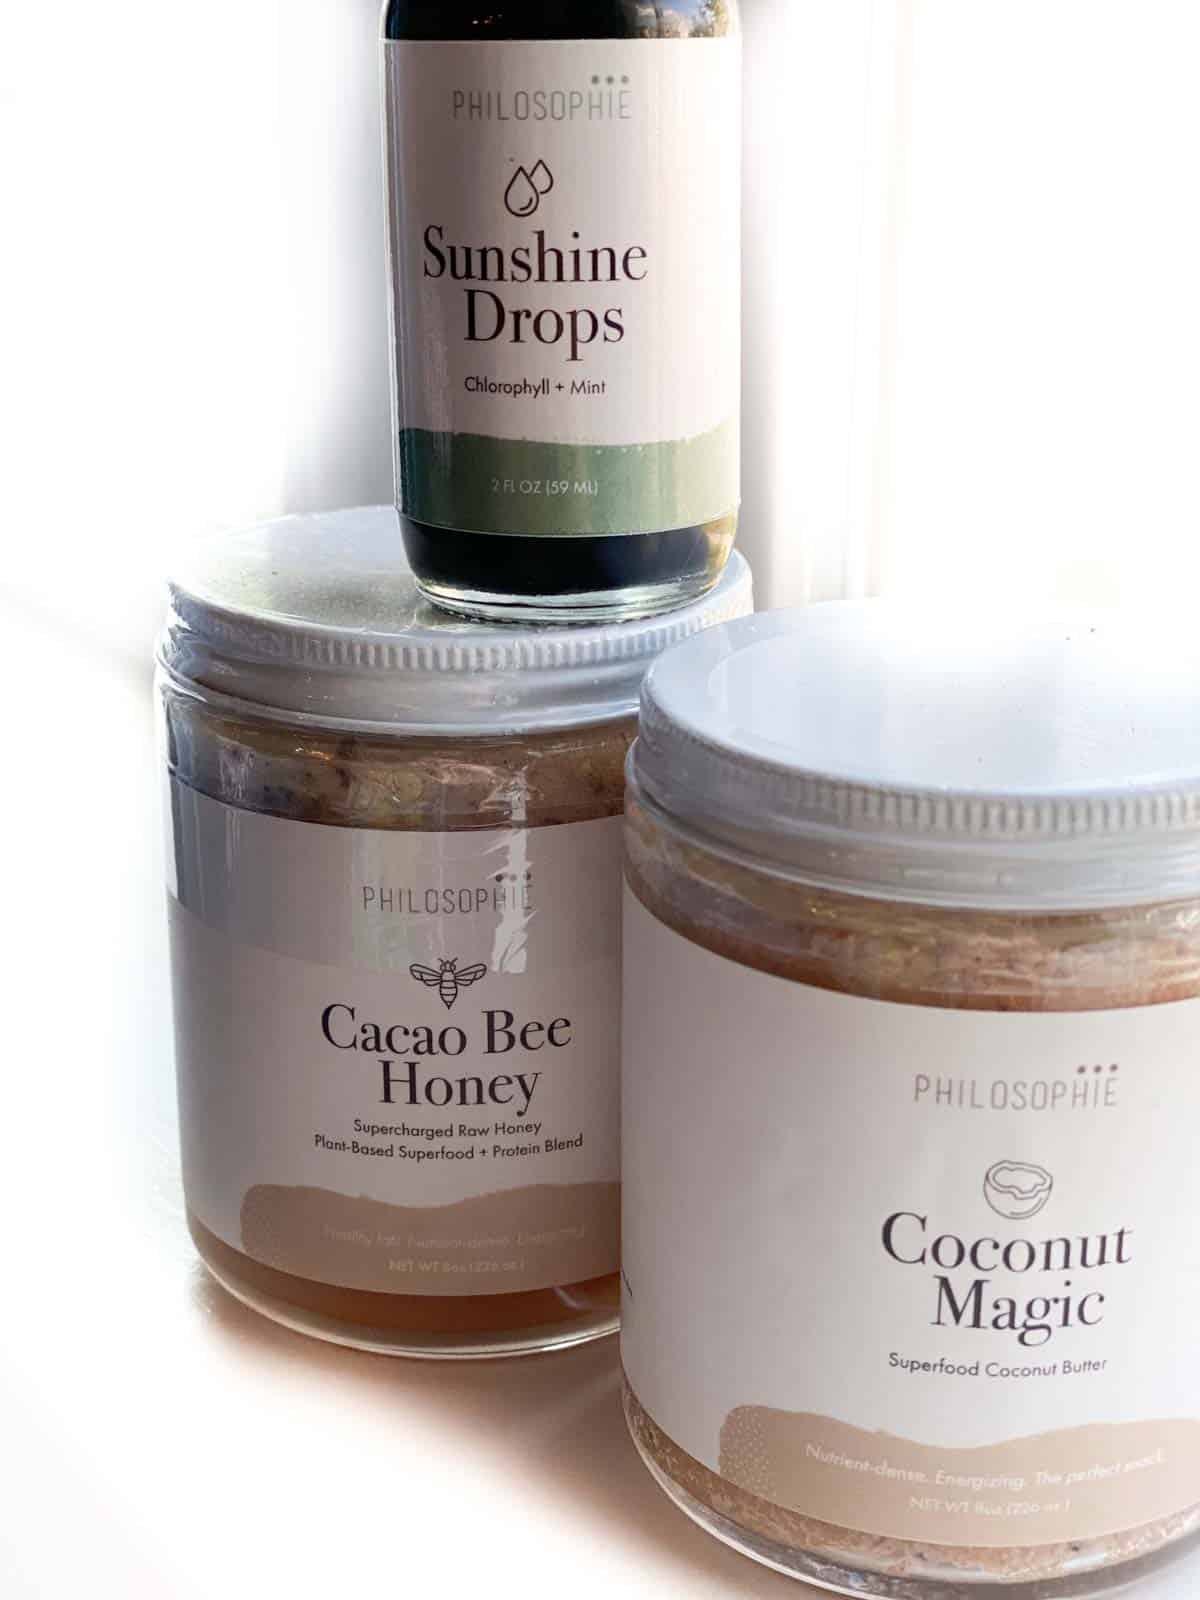 3 products from Philosophie superfoods line - cacao bee honey, coconut magic and sunshine drops